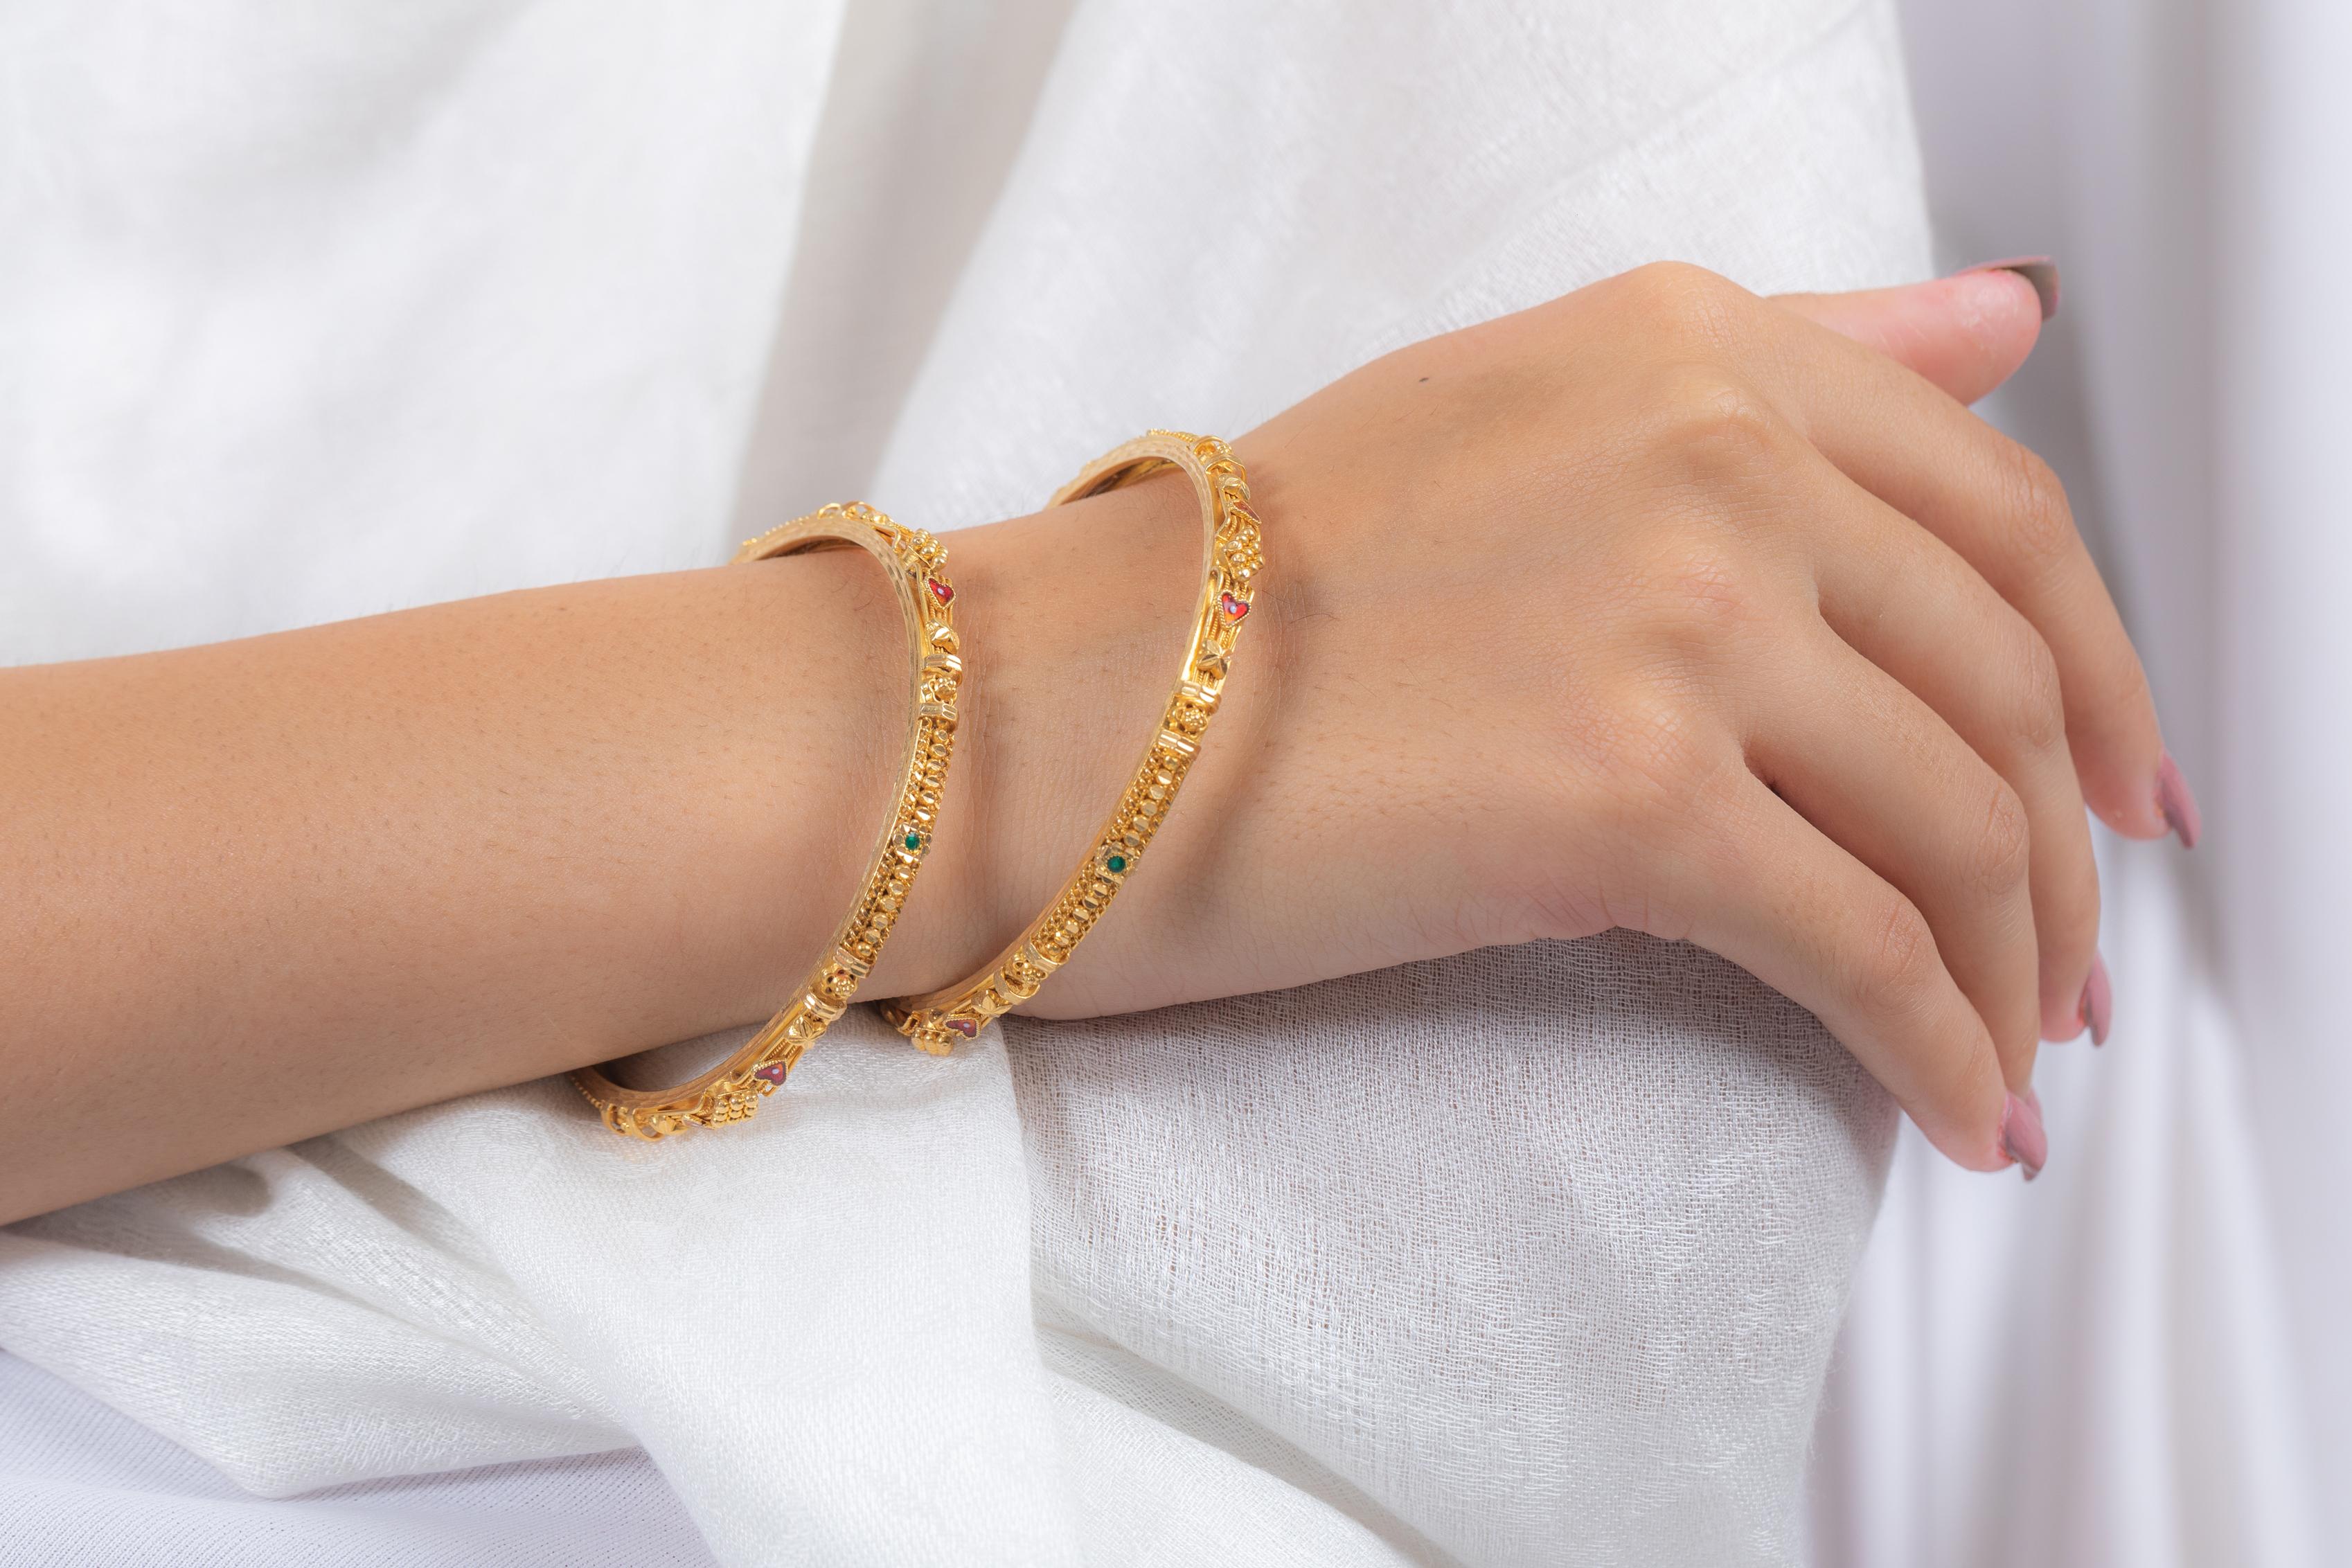 Indian style engraved Bangle in 18K Gold. It’s a great jewelry ornament to wear on occasions and at the same time works as a wonderful gift for your loved ones. These lovely statement pieces are perfect generation jewelry to pass on.
Bangles feel